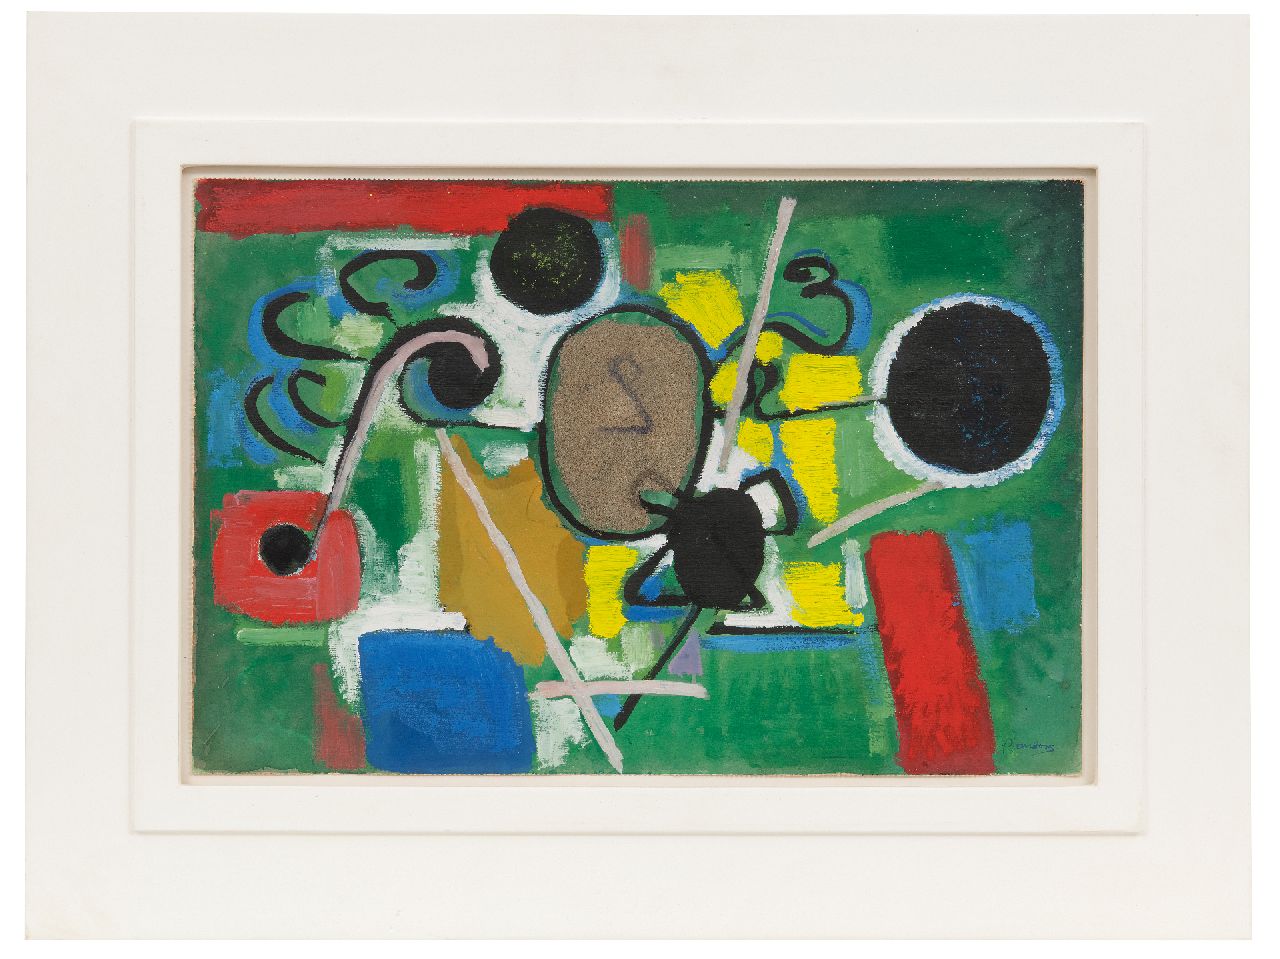 Ouborg P.  | Pieter 'Piet' Ouborg |  offered for sale | Composition, gouache and sand on paper 27.0 x 40.5 cm, signed l.r. and on the reverse and executed ca. 1949